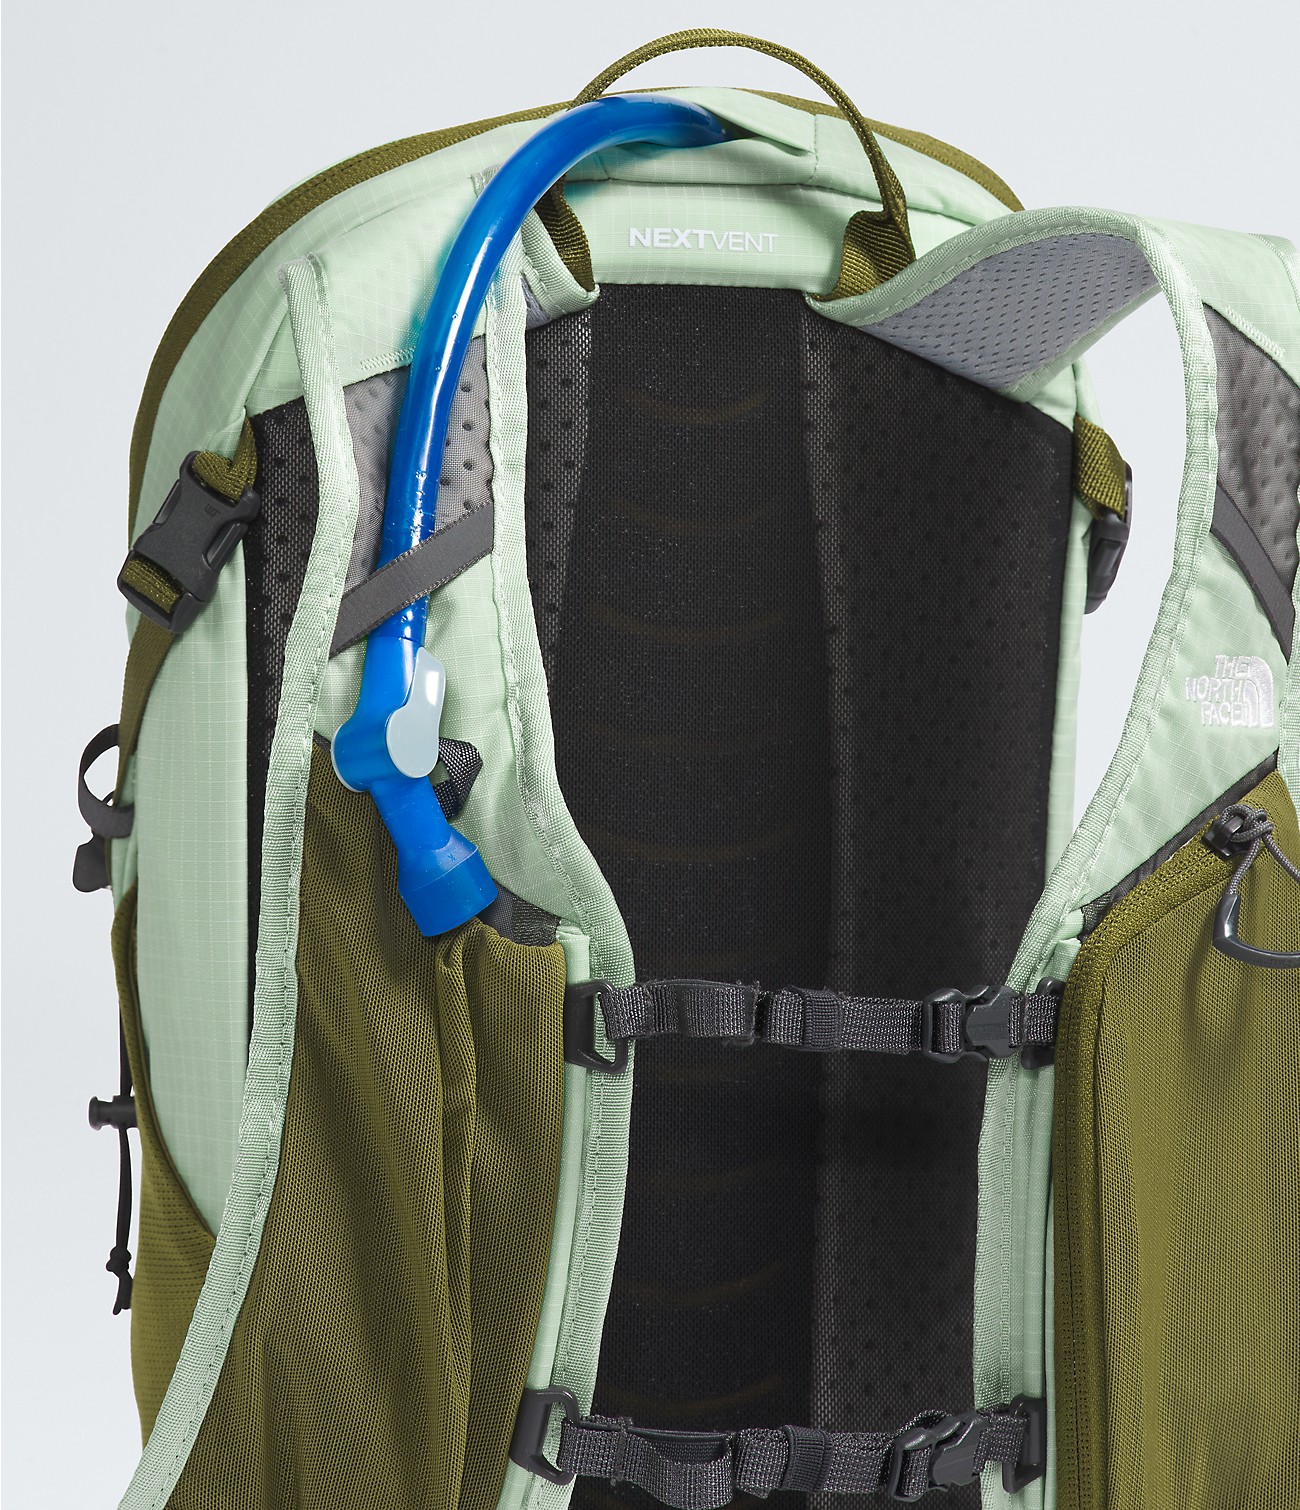 Women’s Trail Lite 12 Backpack | The North Face